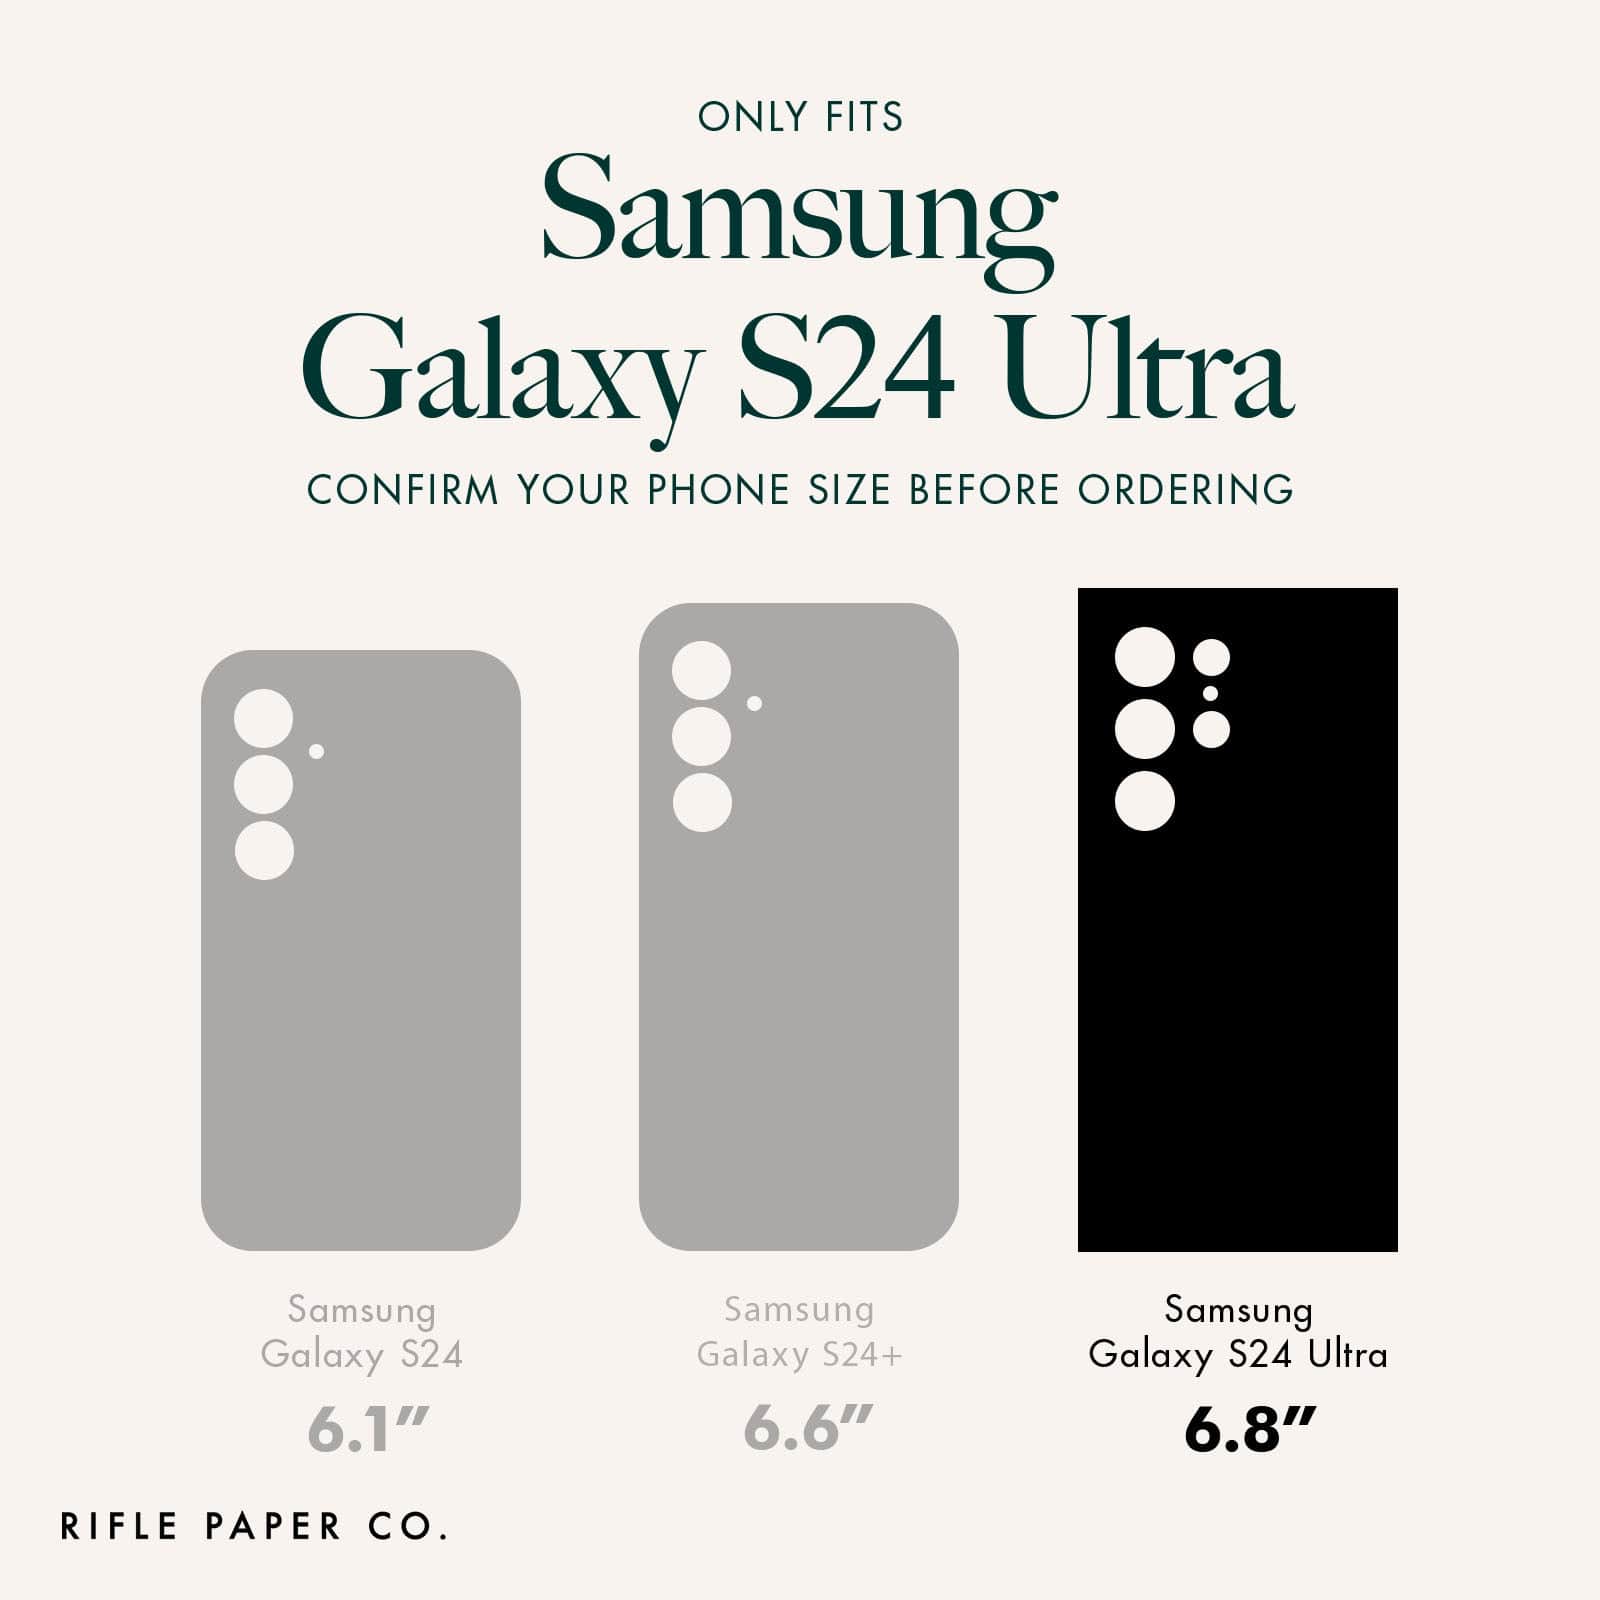 Samsung Galaxy S24 Ultra In-Depth Review, by Vincent Vega